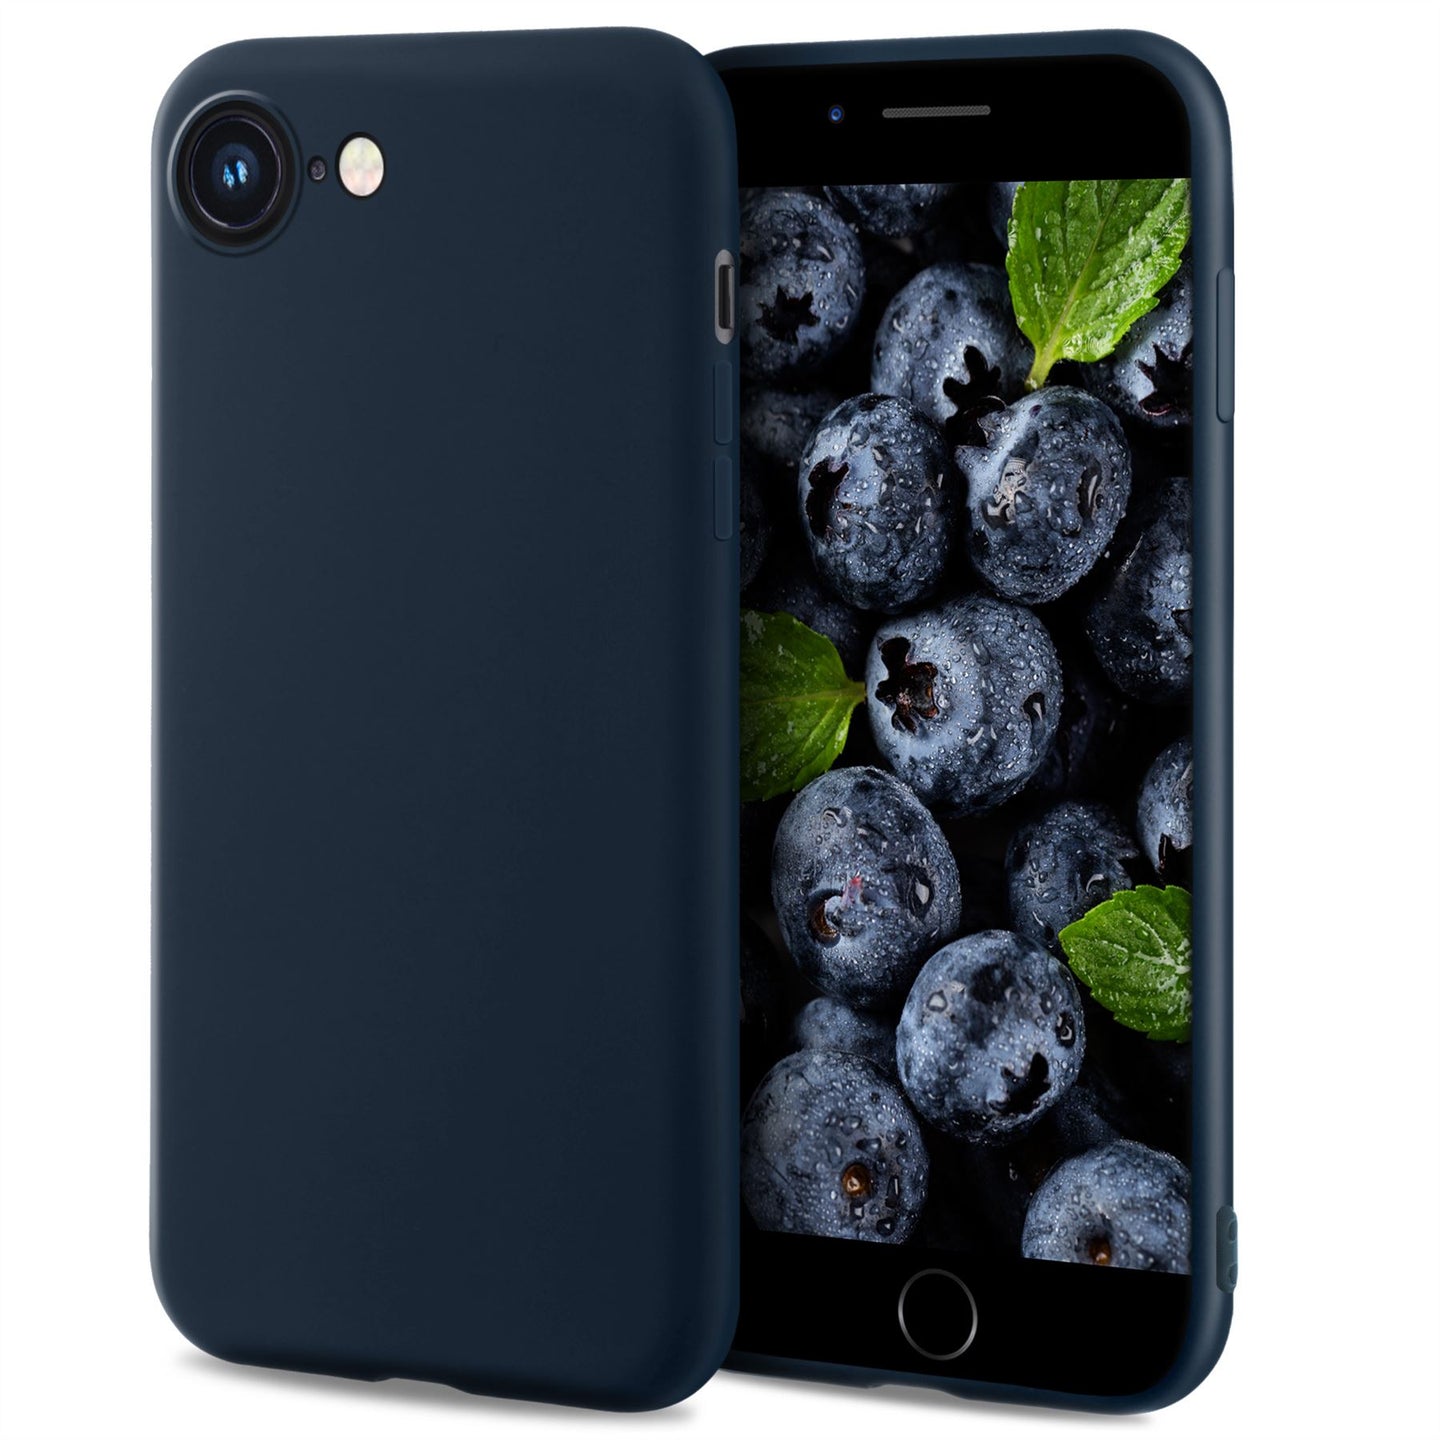 Moozy Lifestyle. Case for iPhone SE 2020, iPhone 8 and iPhone 7, Midnight Blue - Liquid Silicone Cover with Matte Finish and Soft Microfiber Lining